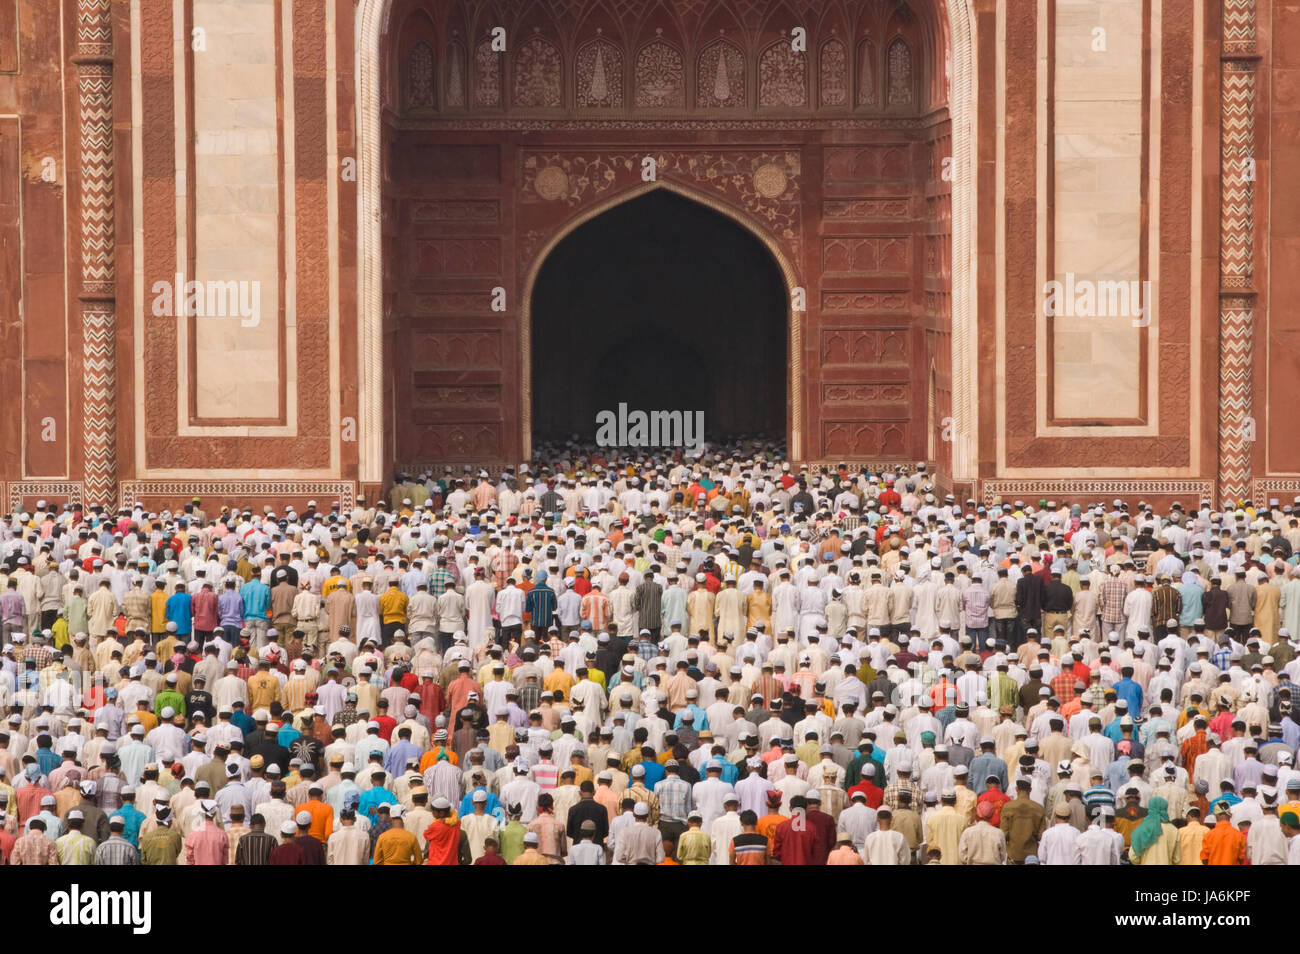 Thousands of gather in front of the mosque at the Taj Mahal to celebrate the Muslim festival of Eid ul-Fitr in Agra, Uttar Pradesh, India. Stock Photo